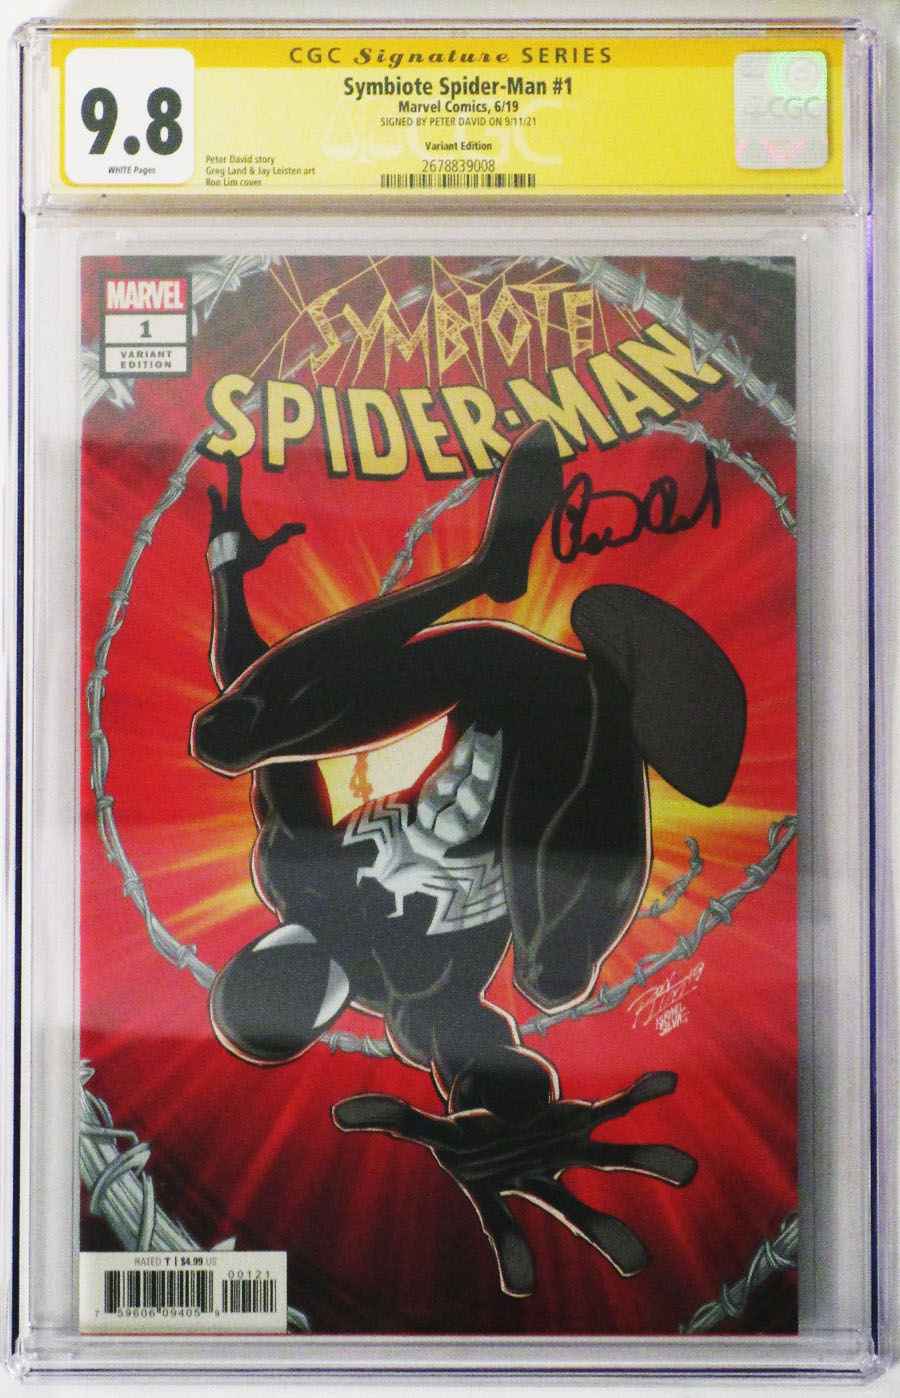 Symbiote Spider-Man #1 Cover P Variant Ron Lim Cover Signed By Peter David CGC 9.8